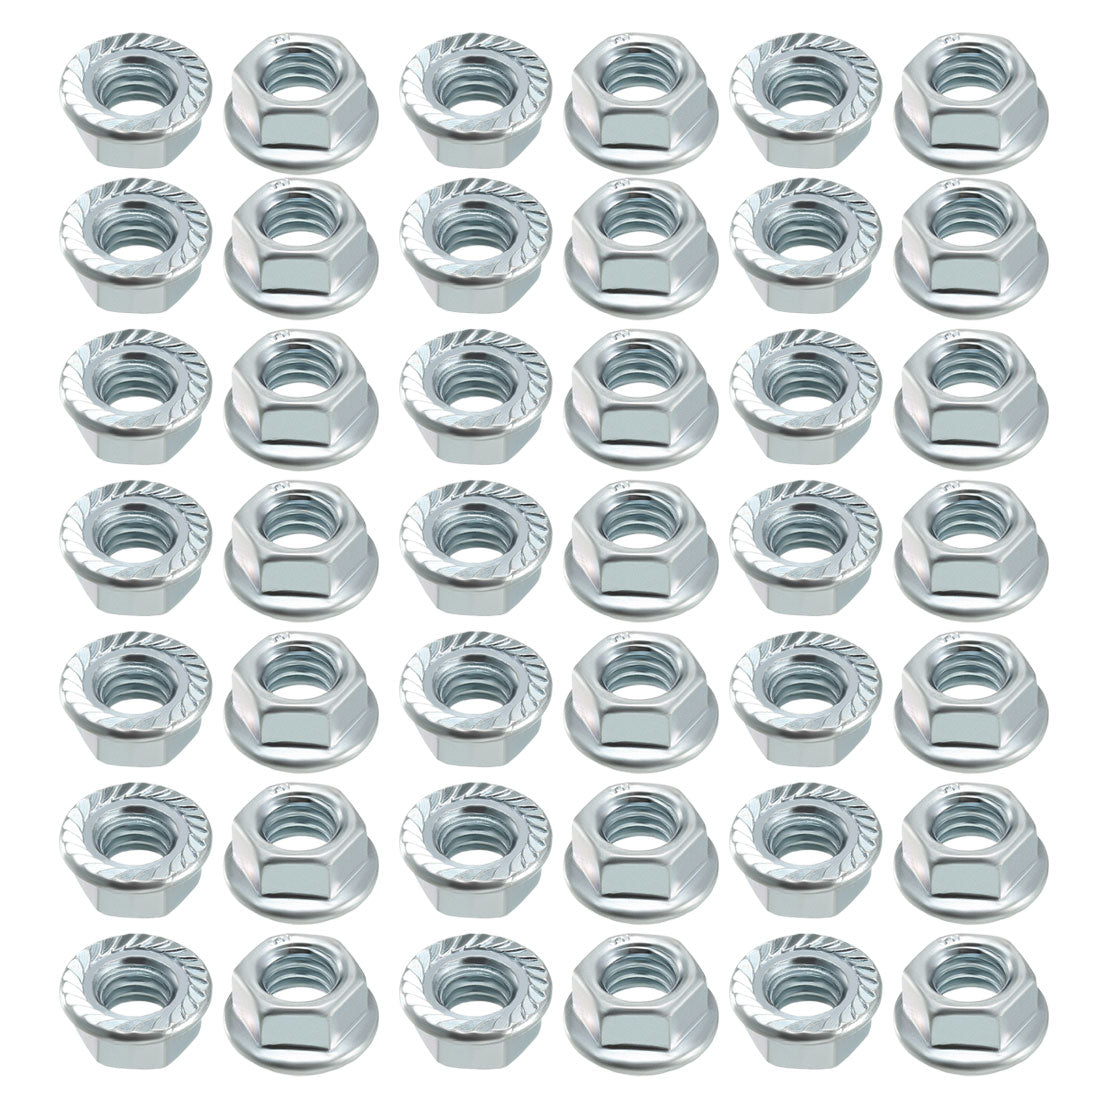 uxcell Uxcell 3/8-16 Serrated Flange Hex Lock Nuts, Carbon Steel 40 Pcs